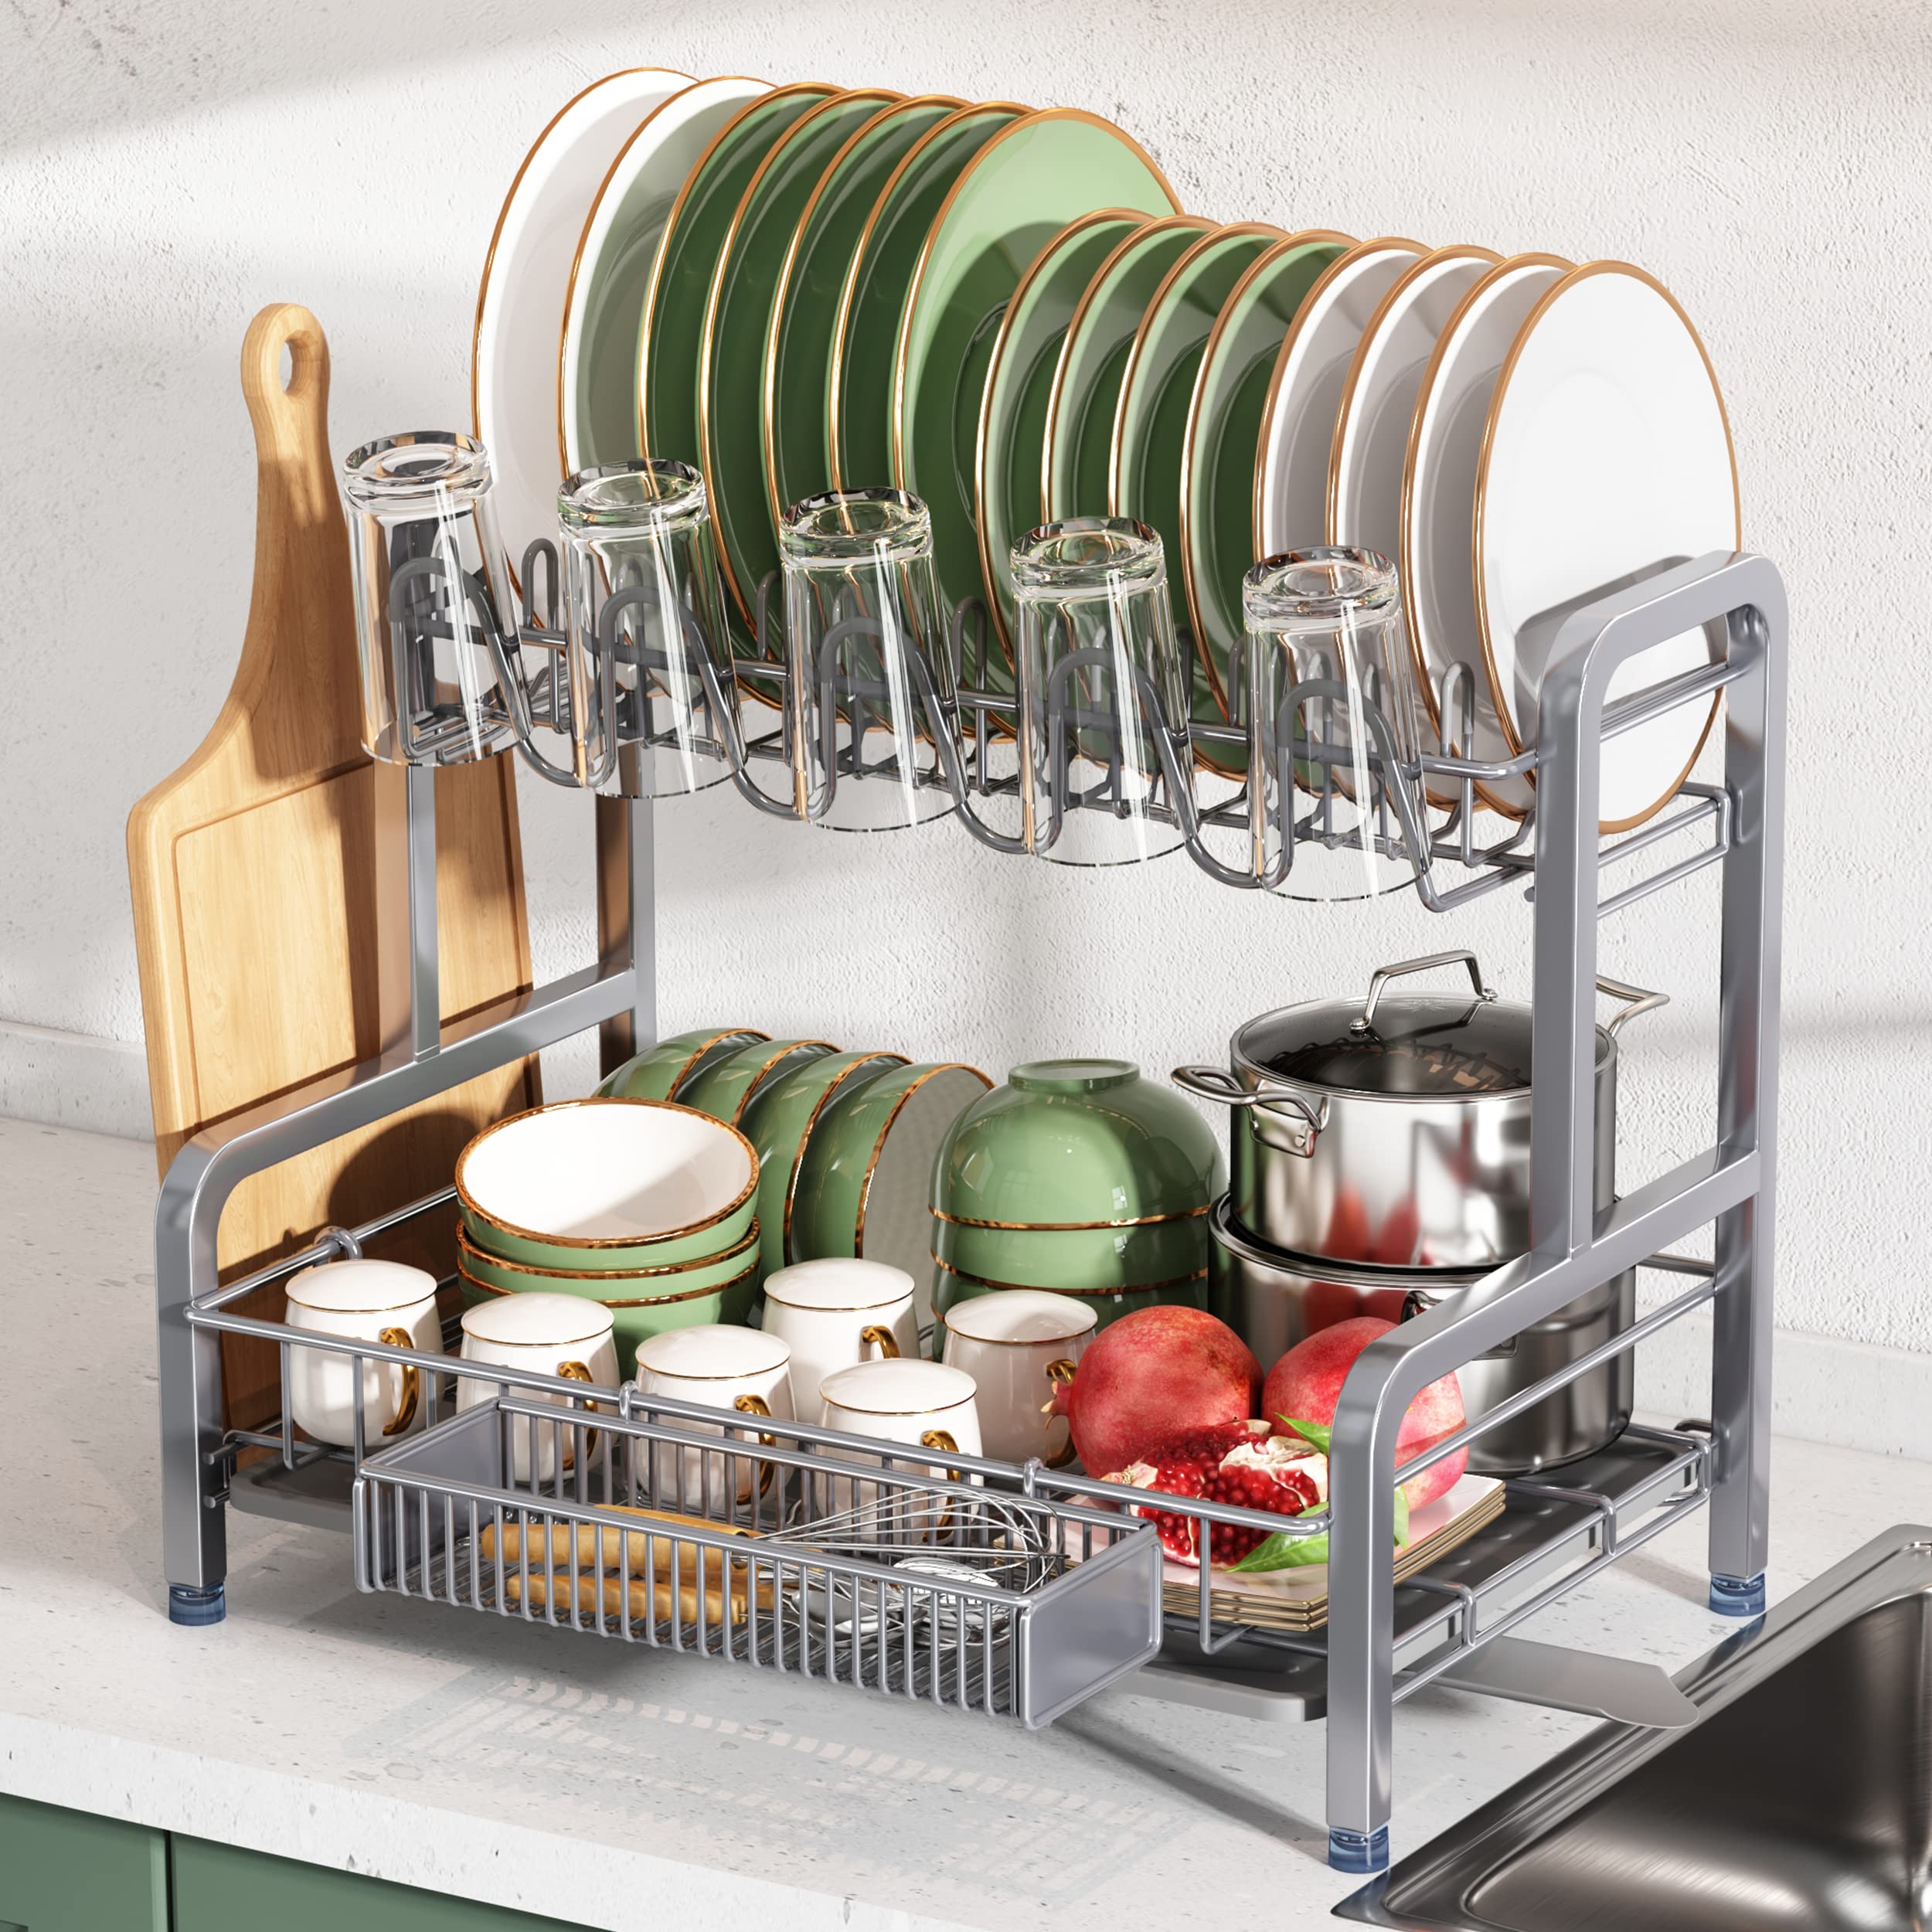 Stainless Steel Sink Organizer Dish Racks with Cups Holder